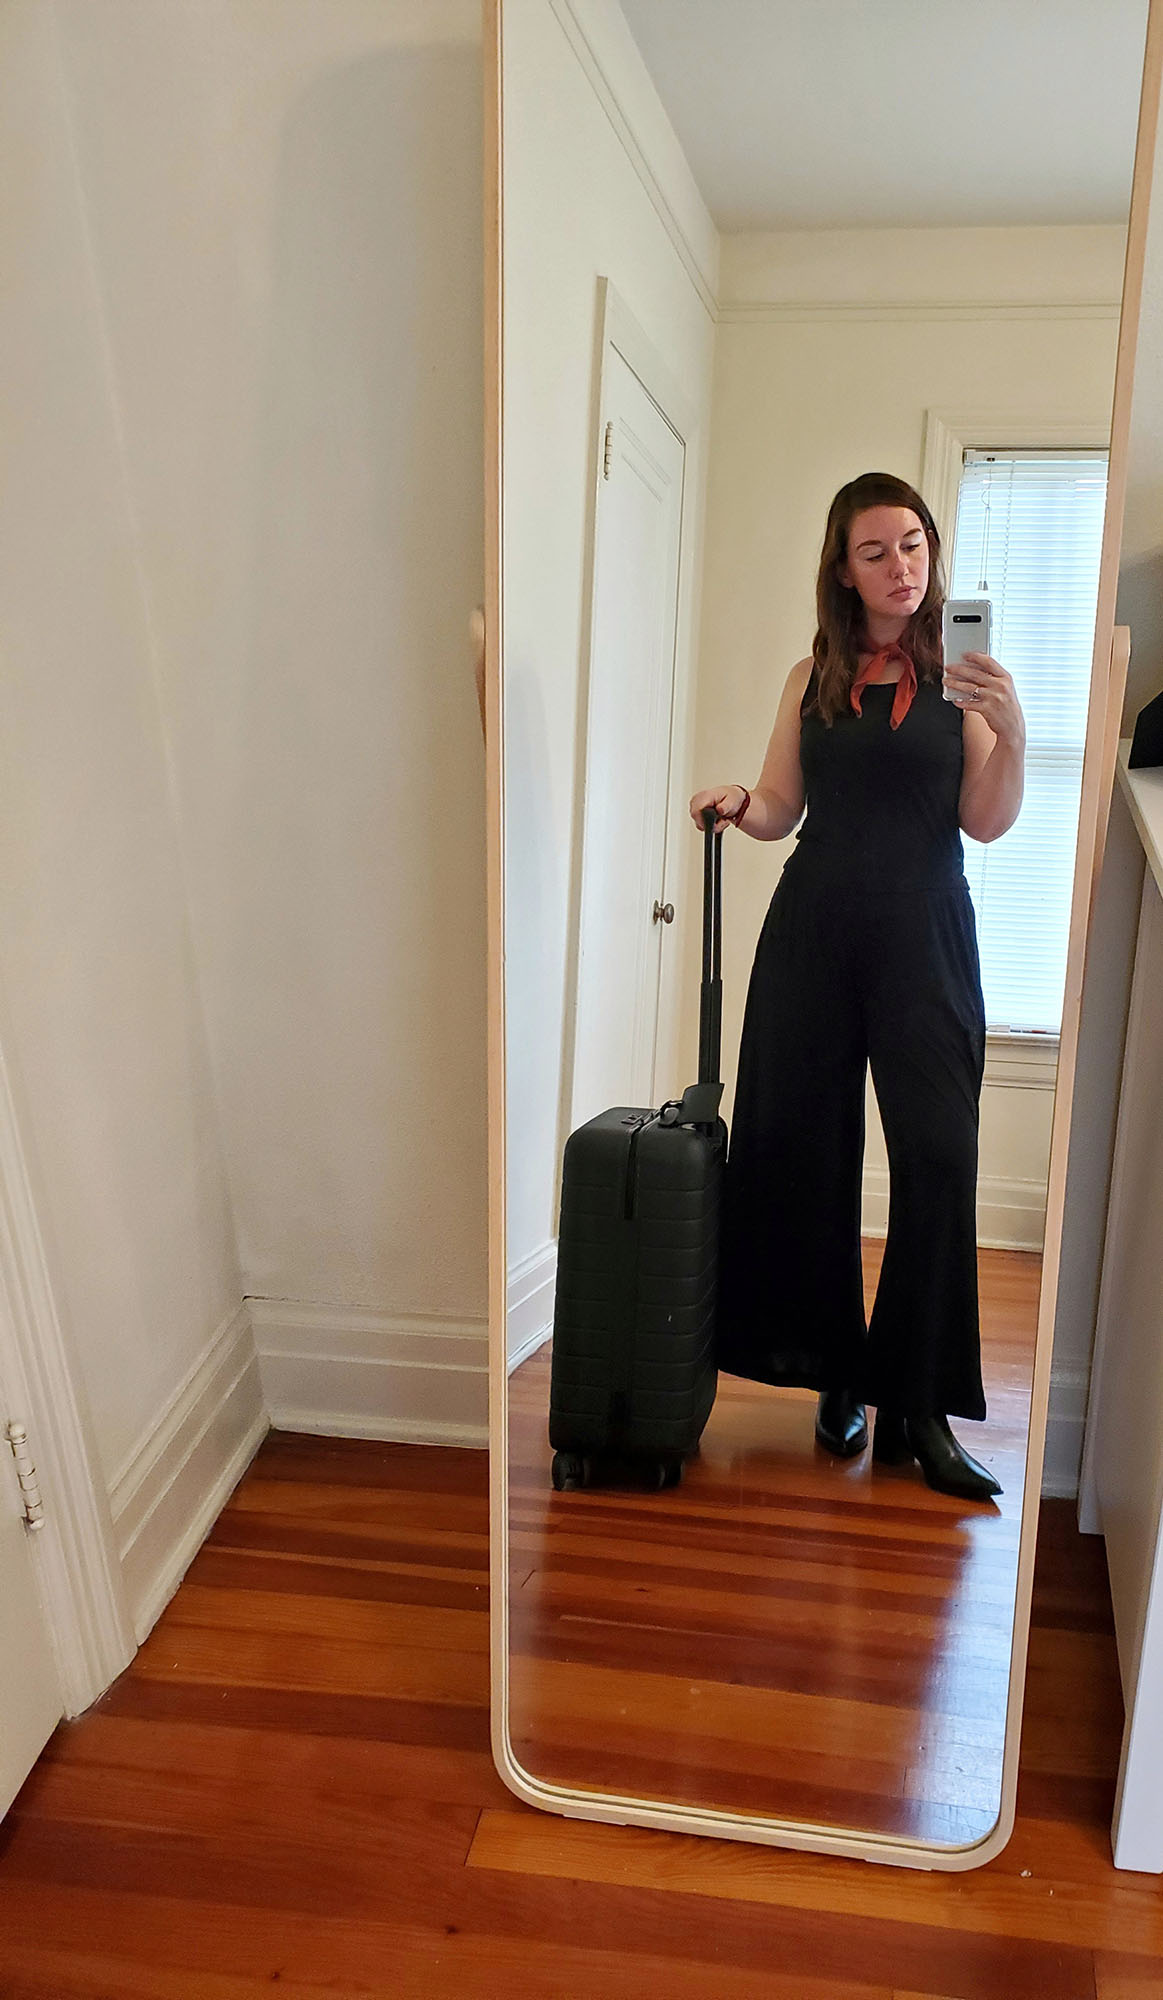 Krystal taking a photo in the mirror before her trip. She is wearing a black tank, black wide leg pants, black boots, and a red bandana. In her right hand is her carry on suitcase.